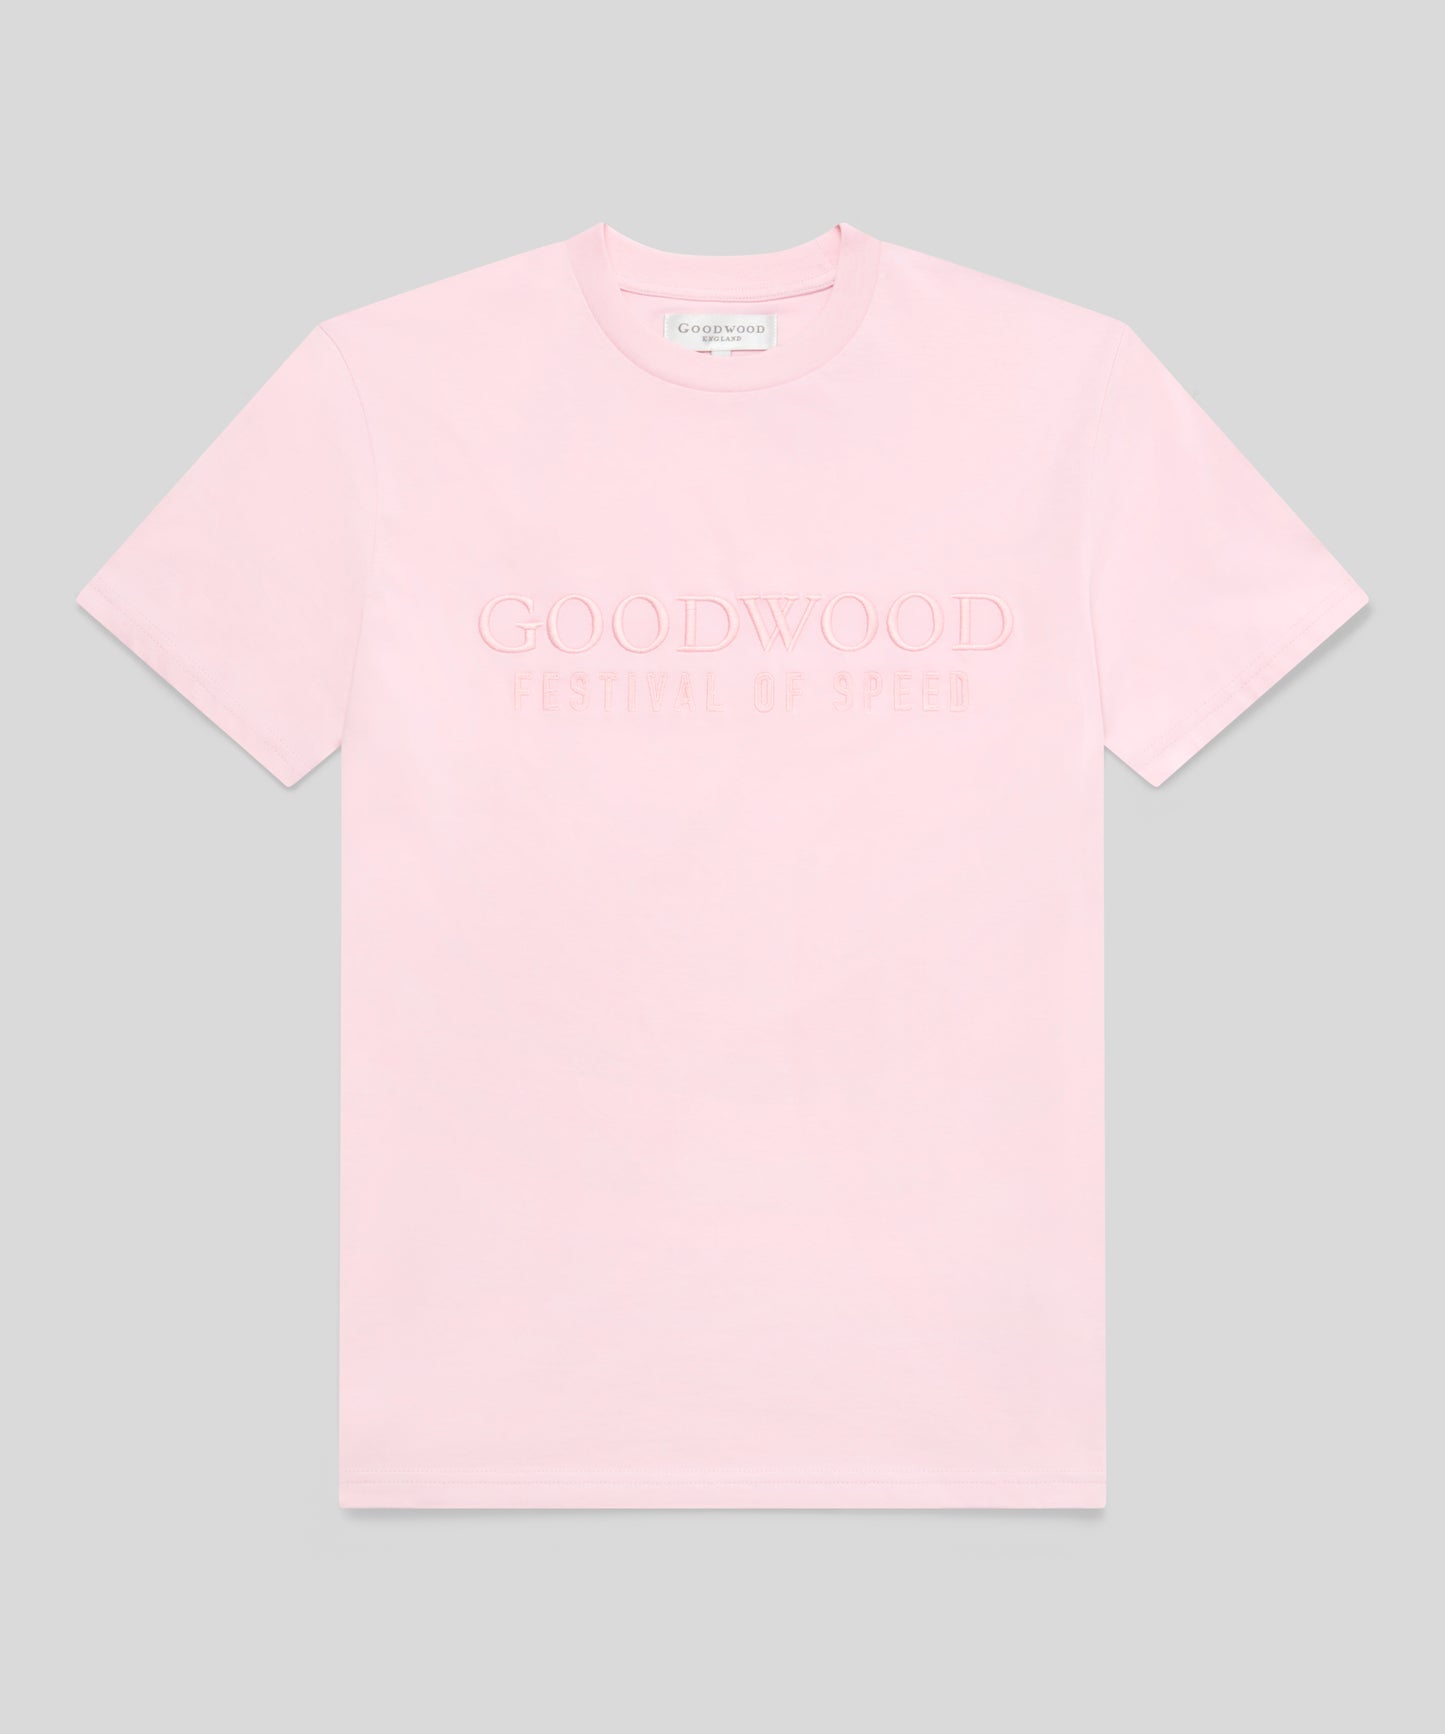 Goodwood Festival of Speed Classic Embroidery T-Shirt